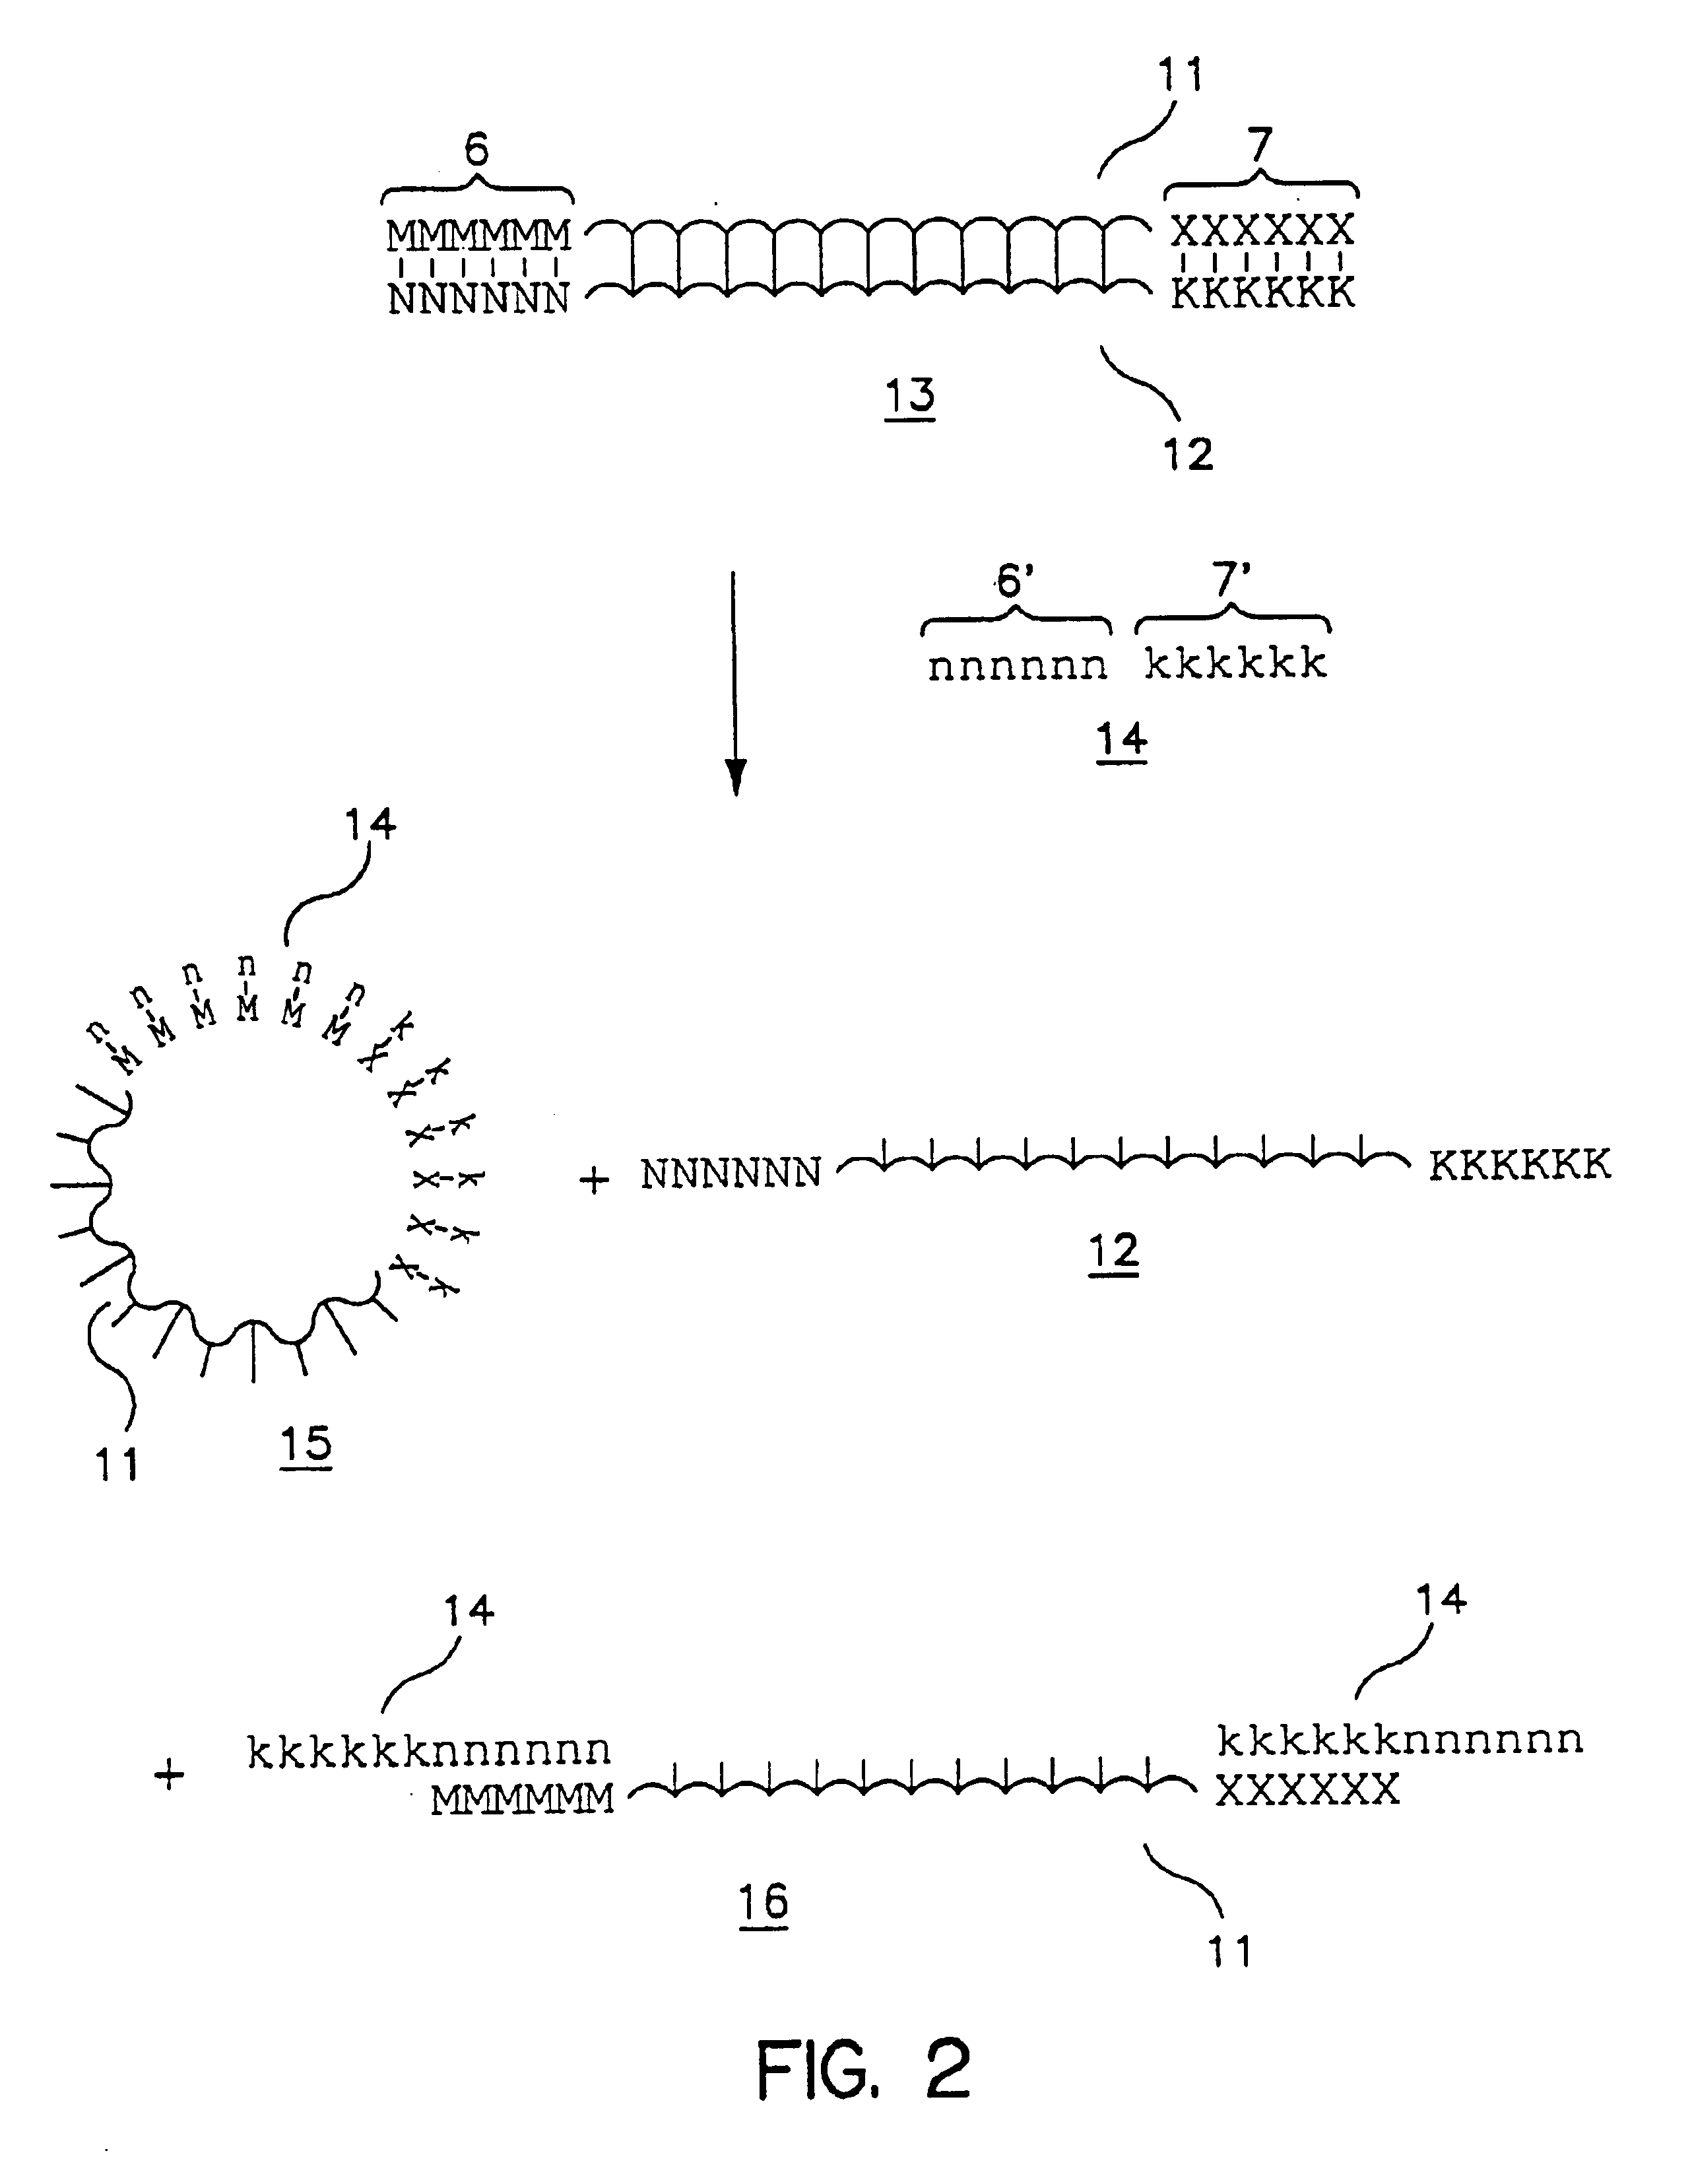 Strand displacement methods employing competitor oligonucleotides for isolating one strand of a double-stranded nucleic acid